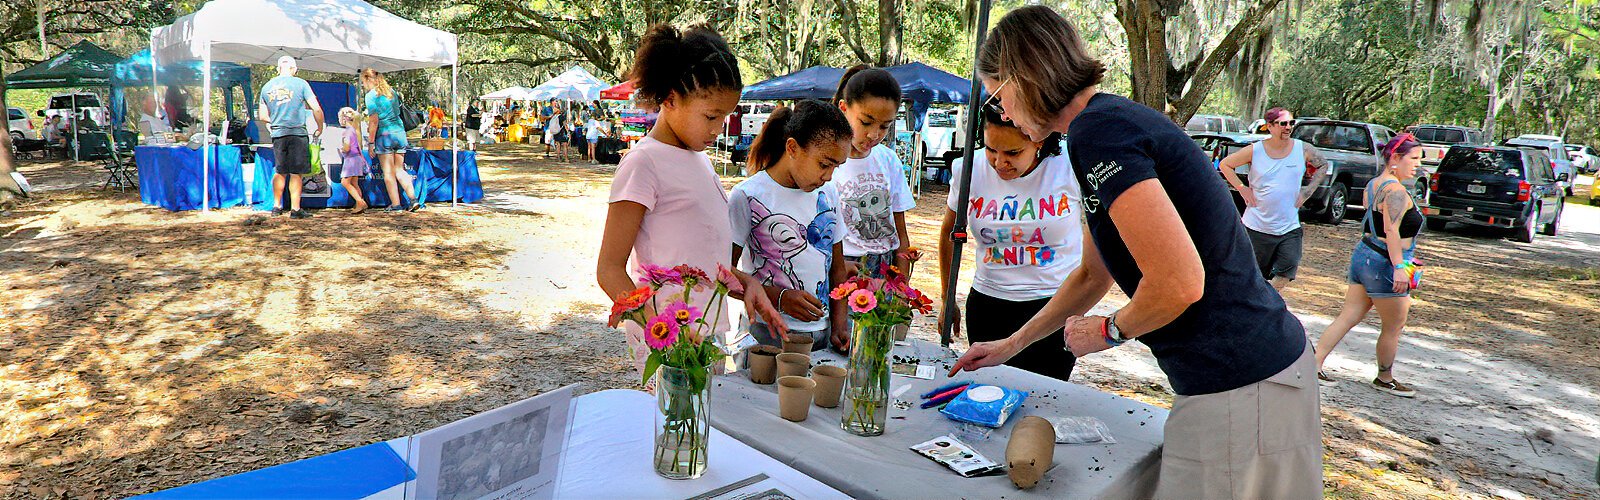 Bonnie Eaton, the Tampa Bay basecamp coordinator for the Jane Goodall Institute's Roots & Shoots youth program, explains how to collect seeds from zinnias and plant them in a small pot to take home. 